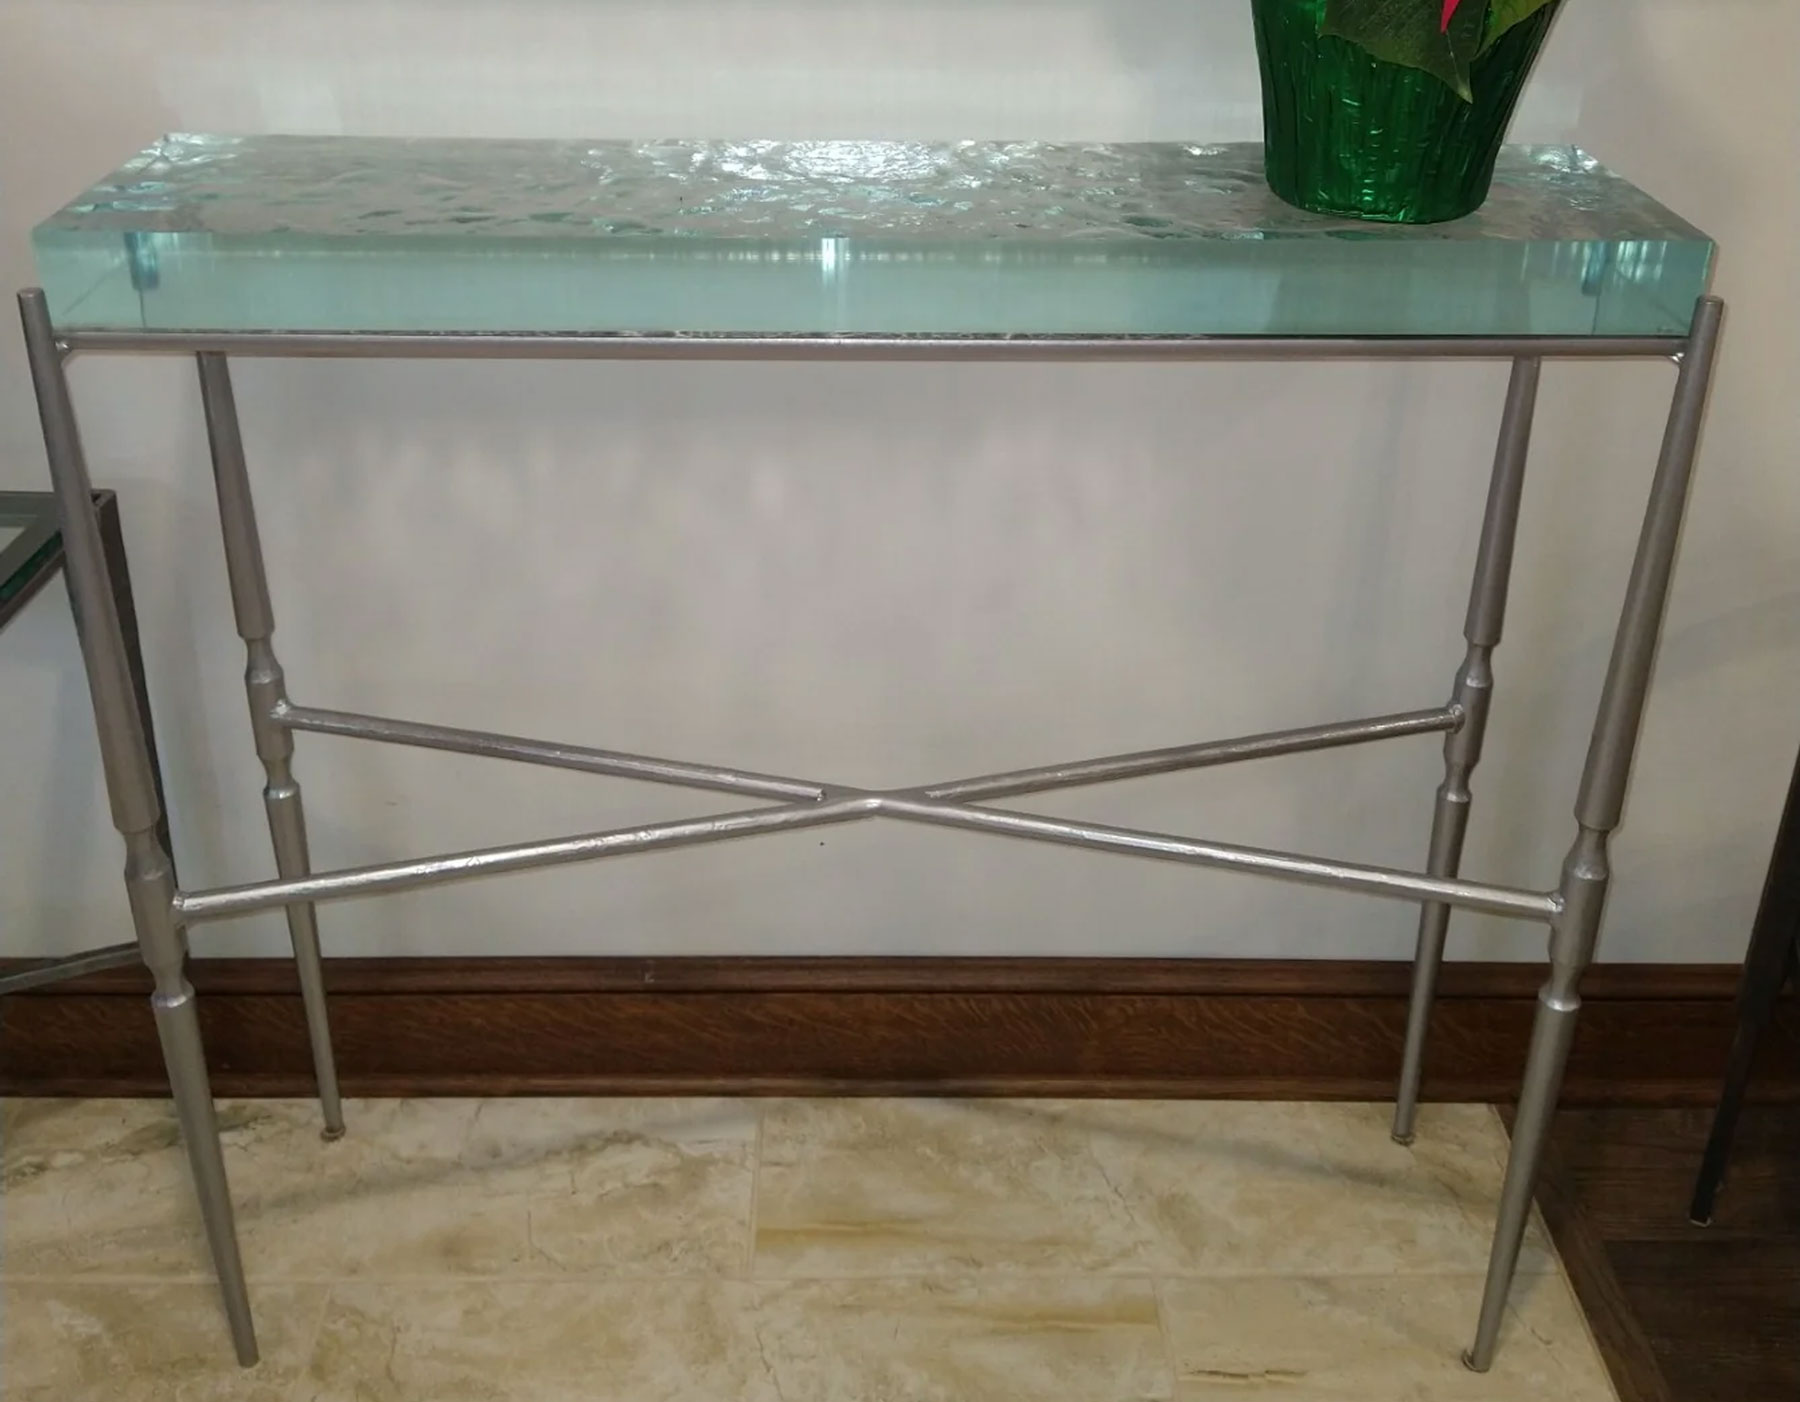 Charleston Forge Calico Bay 34 inch Console with Fusion Glass Top